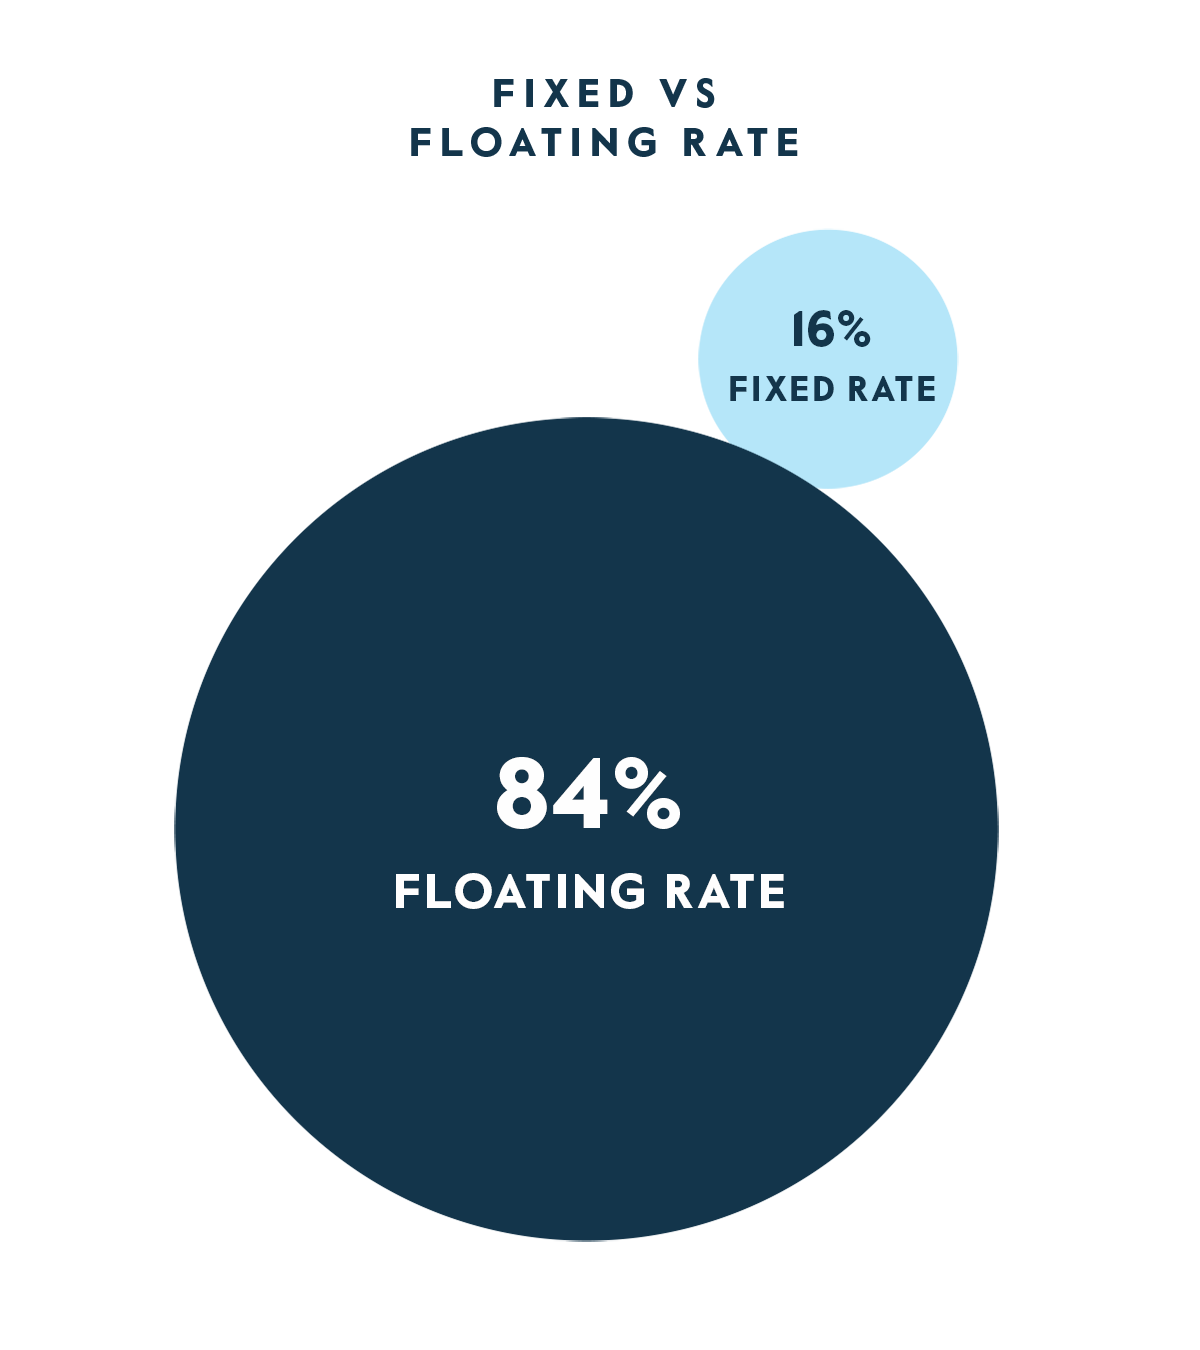 CTAC Fixed vs Floating Rate